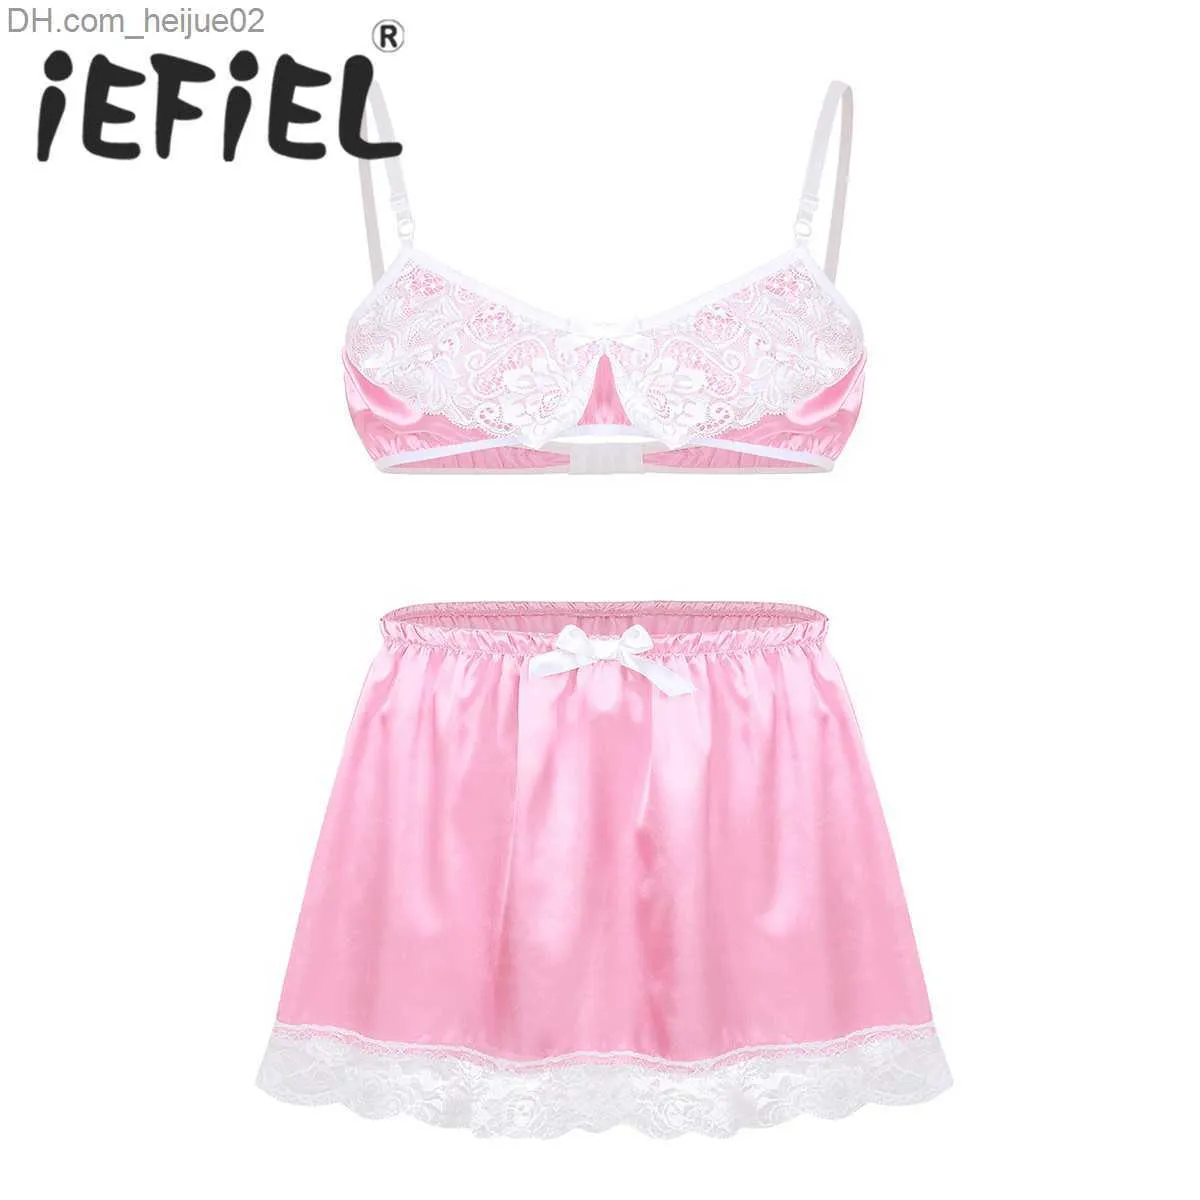 Mens Satin Lace Sissy Lingerie Set Adjustable Spaghetti Straps, Bra And  Knicker Sets Top, Elastic Waistband, Short Skirt Sexy And Seductive  LY191222 Z230701 From Heijue02, $3.97